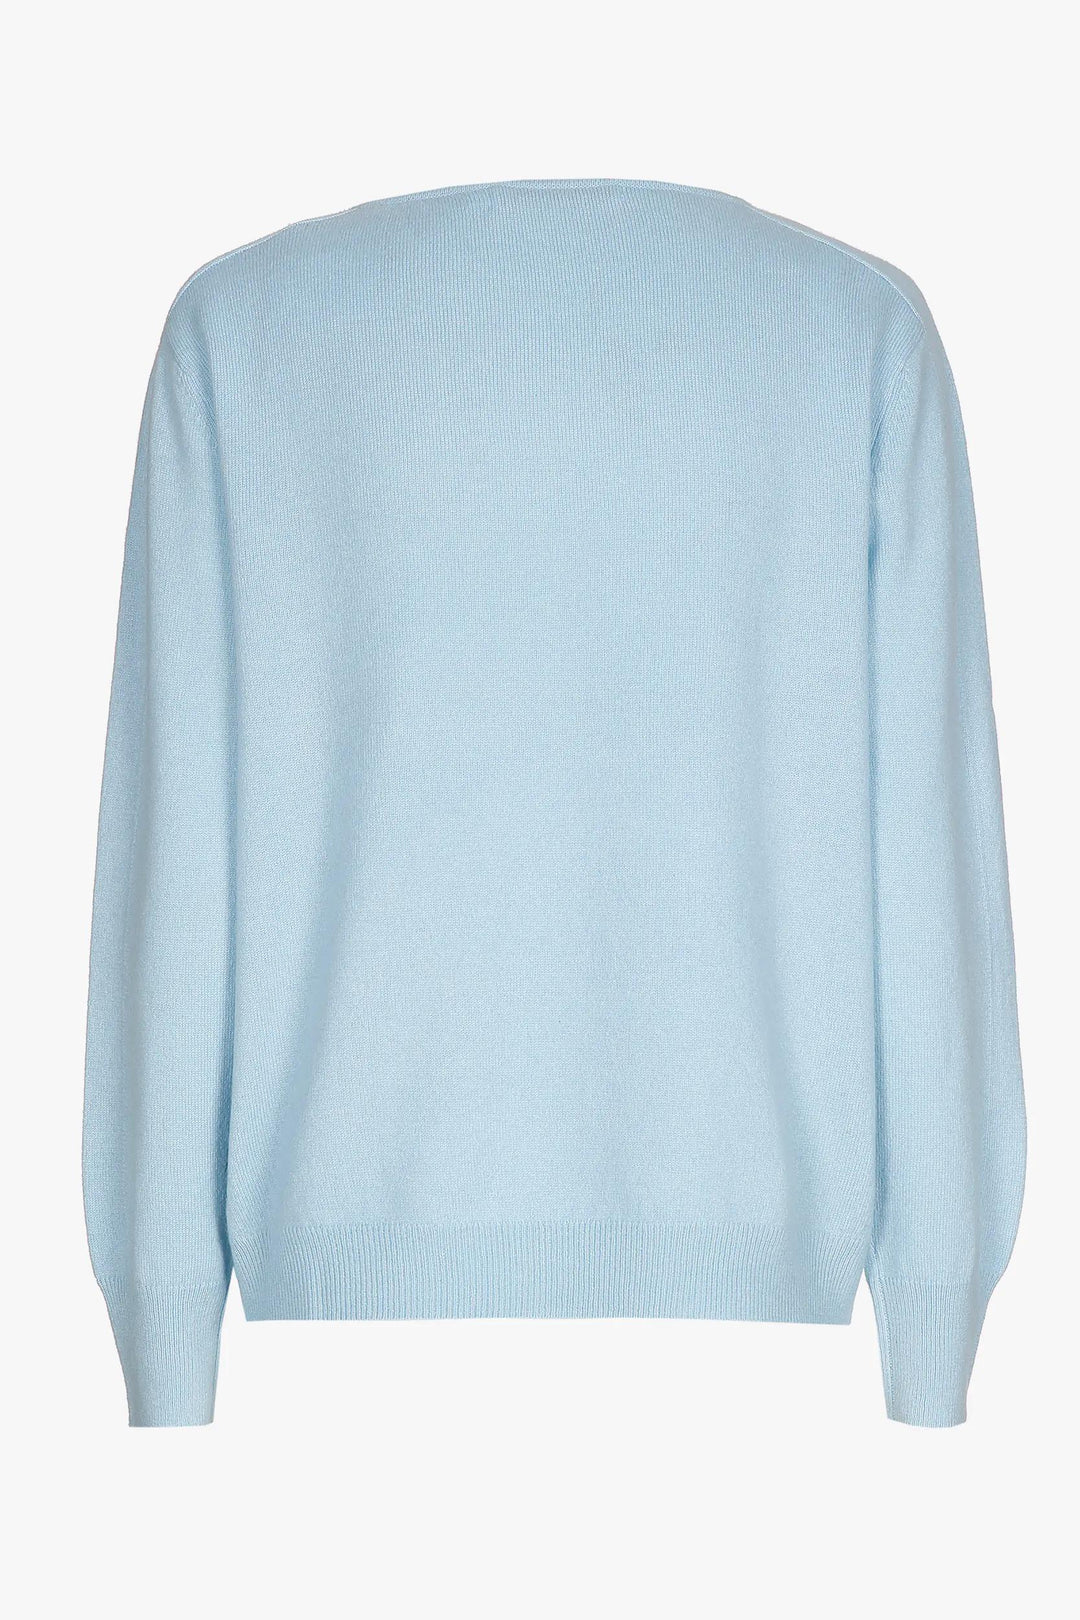 light blue flowing cashmere sweater